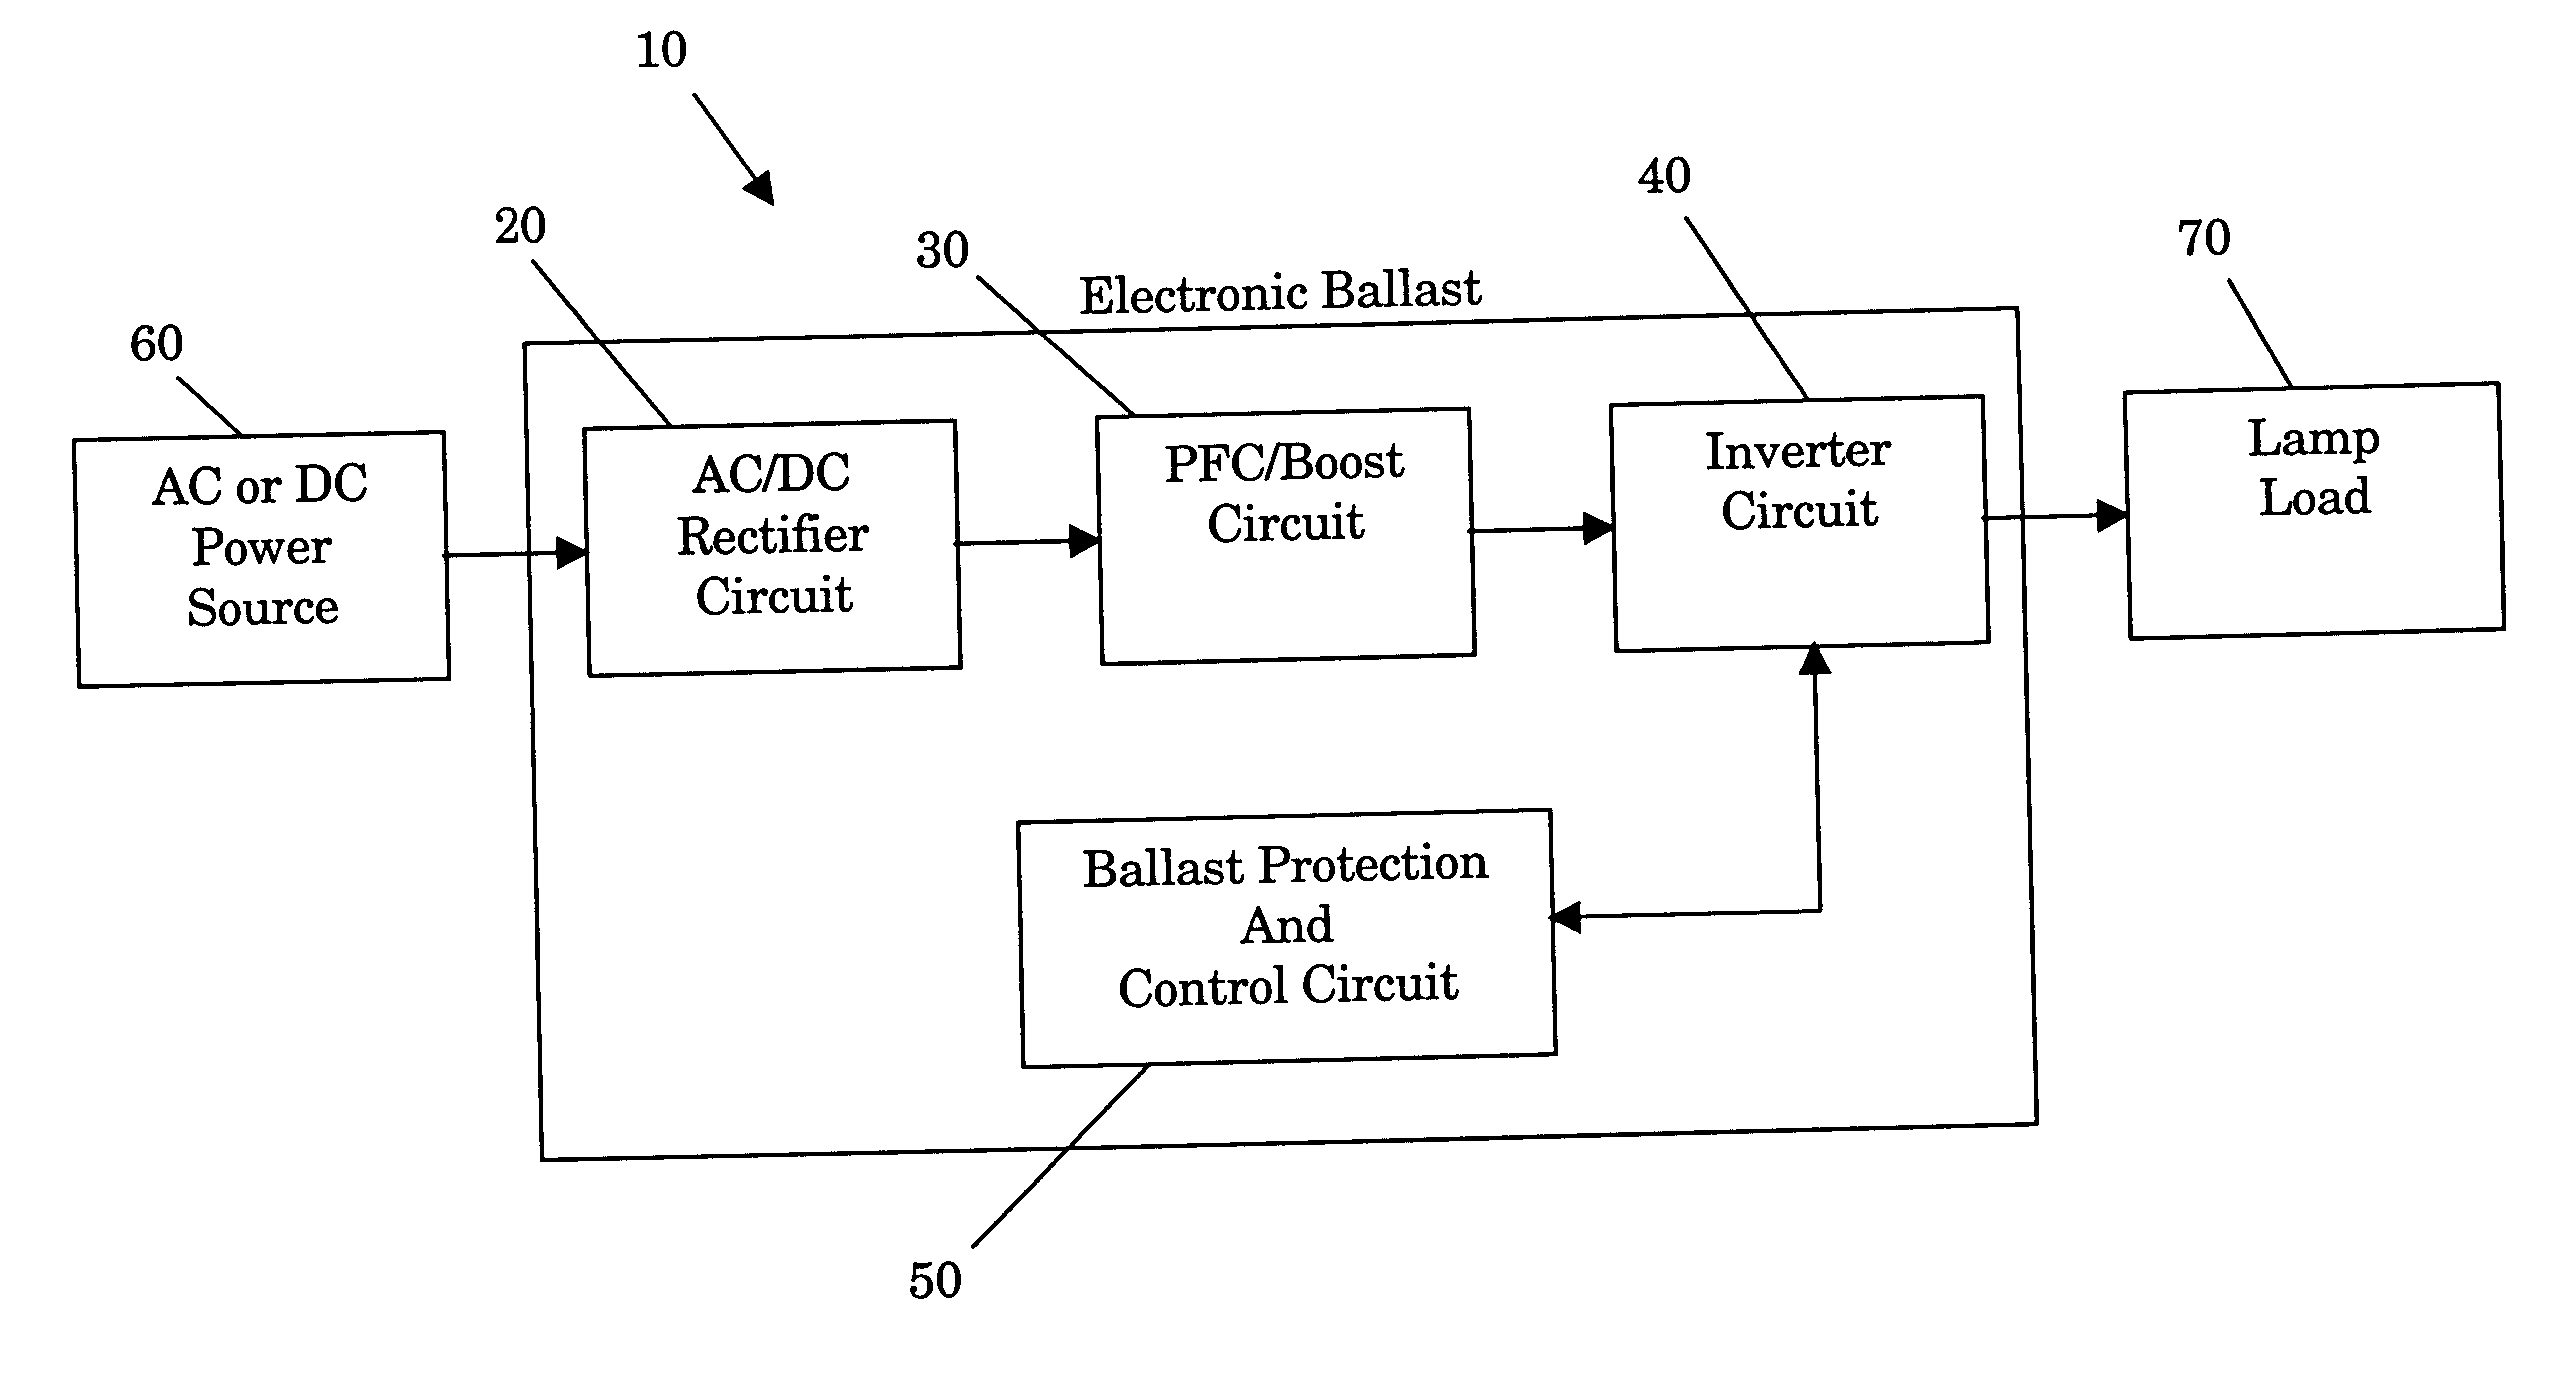 Electronic ballast having end of lamp life, overheating, and shut down protections, and reignition and multiple striking capabilities